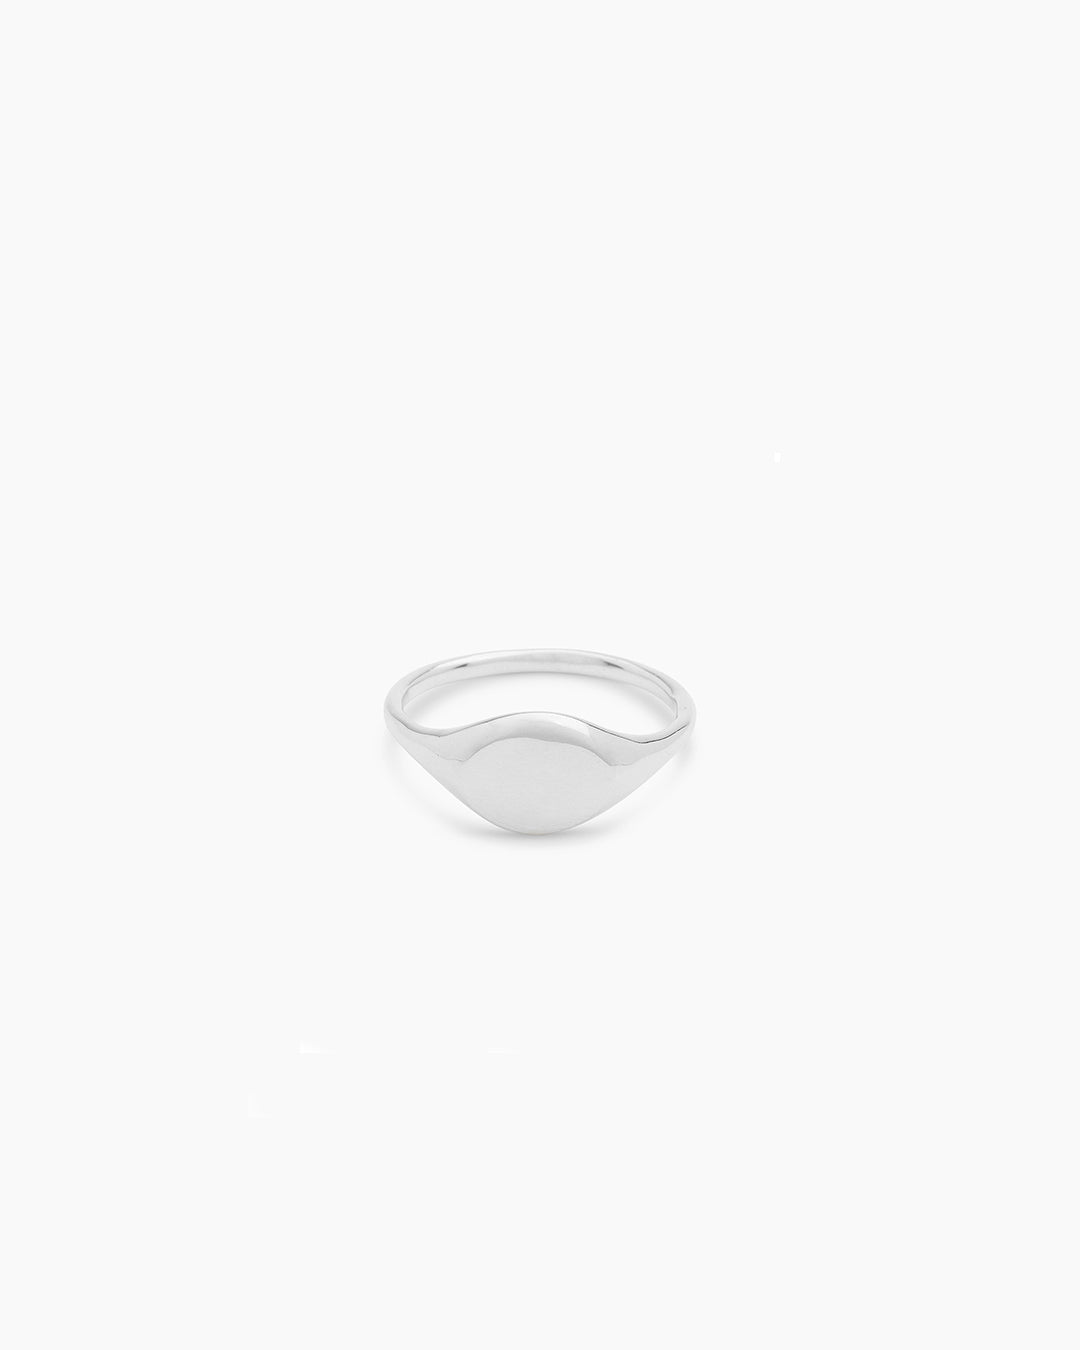 Peter Thomas Roth Ribbon and Reed Explore Signet Ring in sterling silver  with black onyx – Peter Thomas Roth Designs